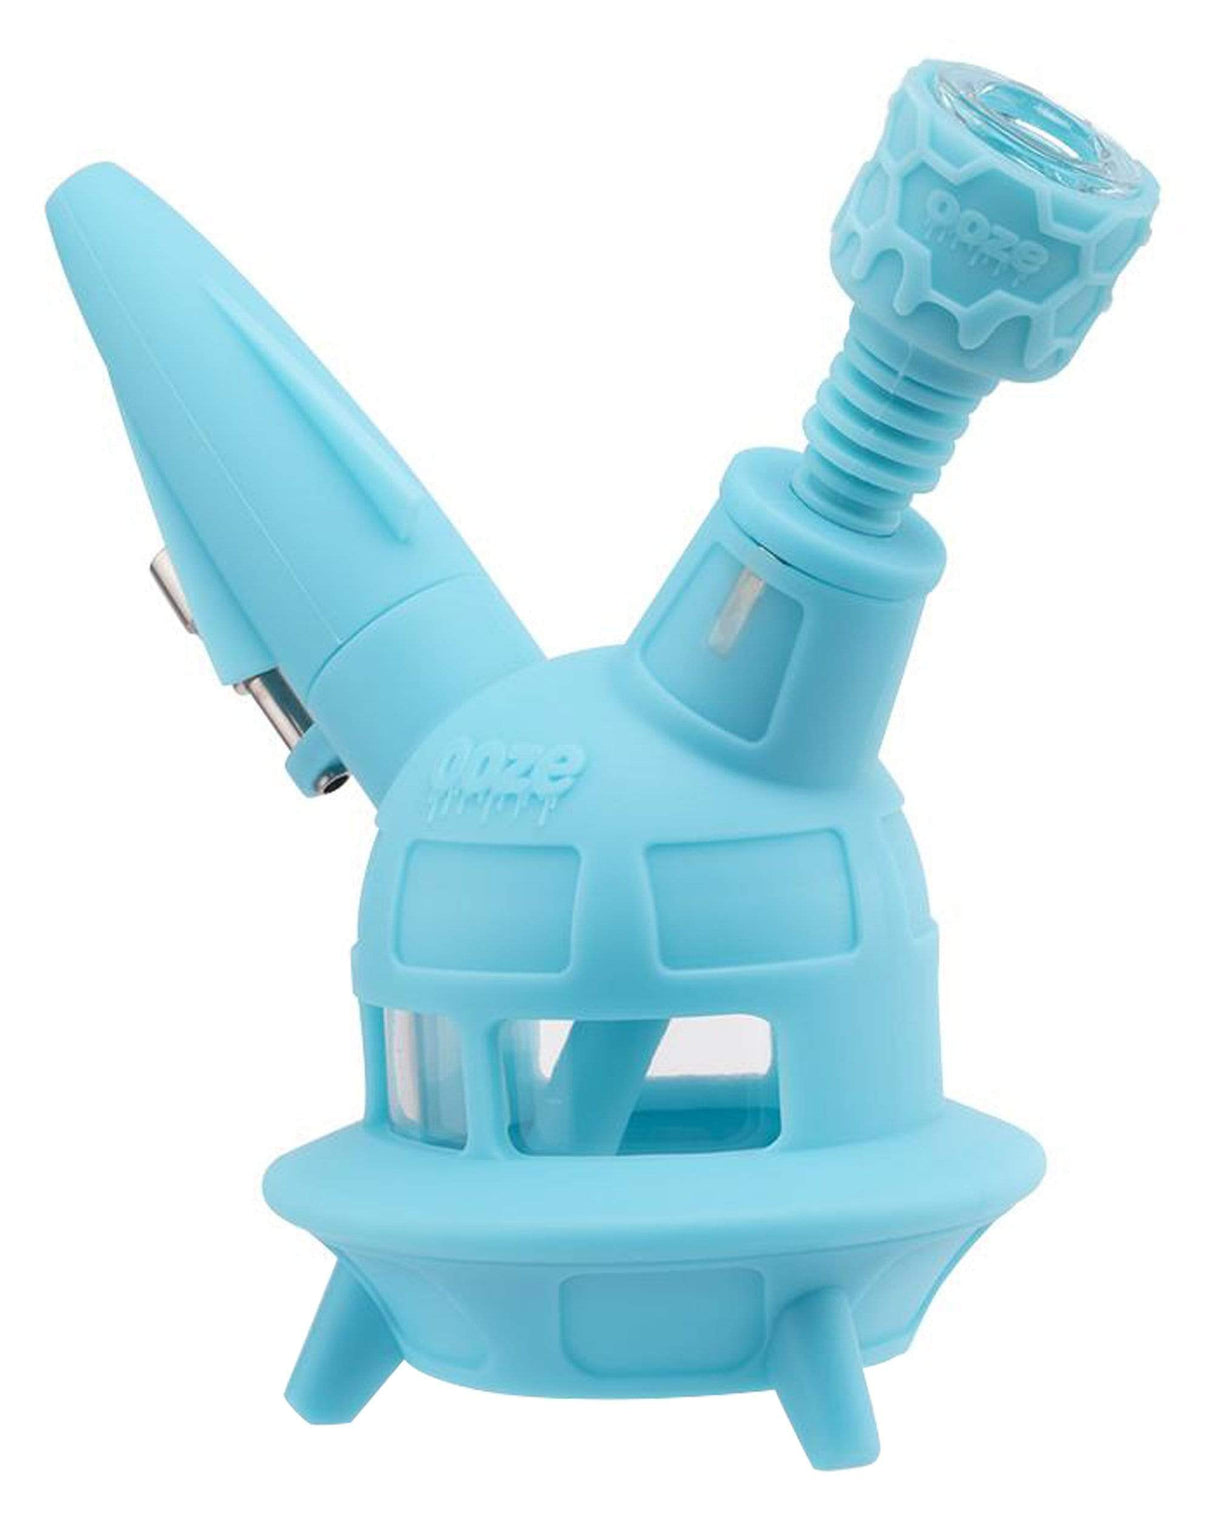 Ooze UFO Silicone Bong in Teal, 7" High, Slitted Percolator, For Dry Herbs & Concentrates, Side View